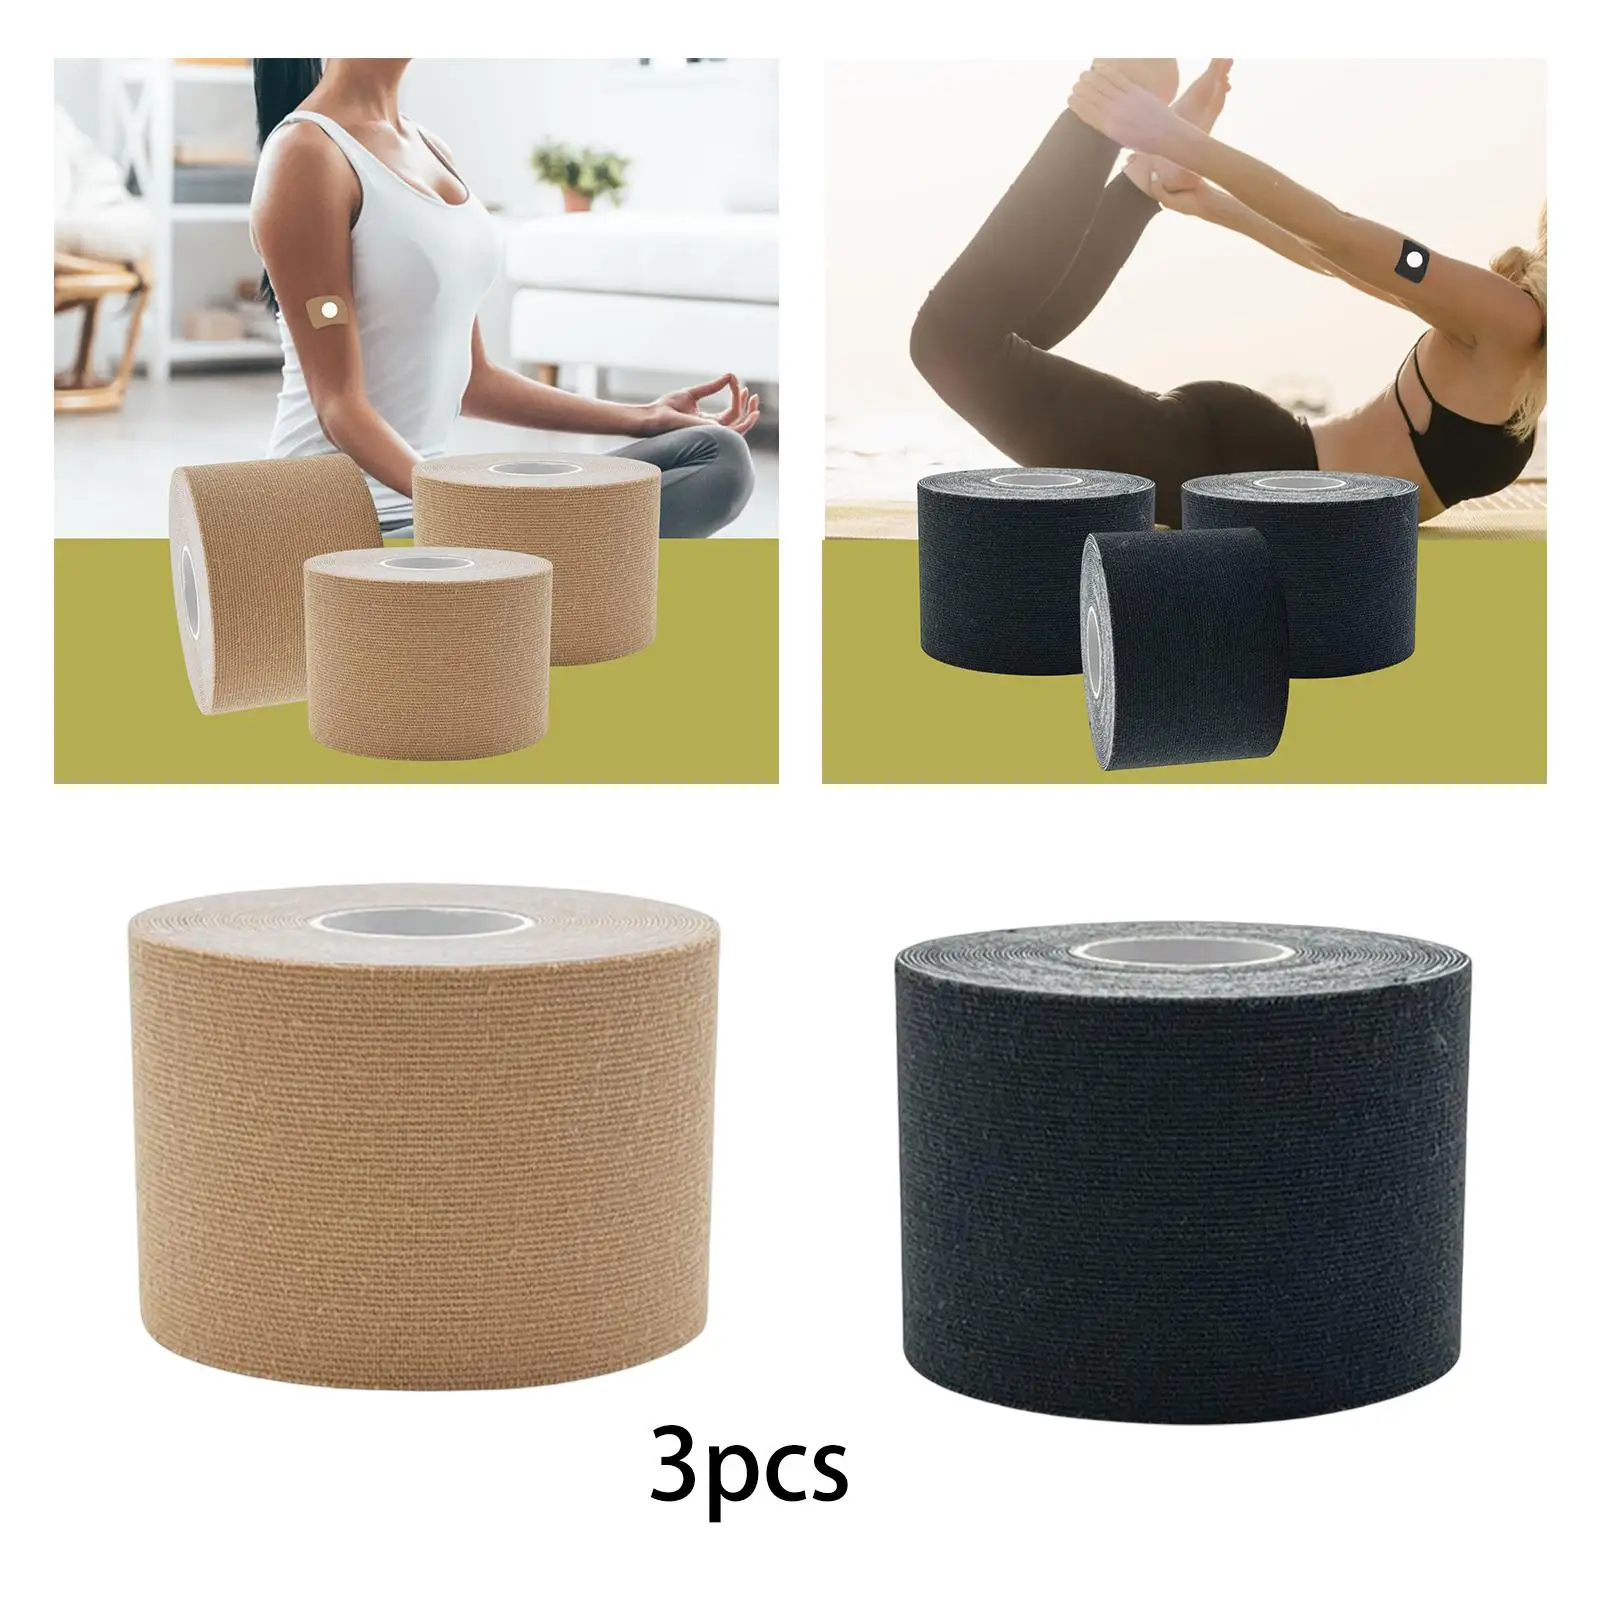 3 Pieces 5M Tape for Sports Breathable with Buttons for Chest Gym Football